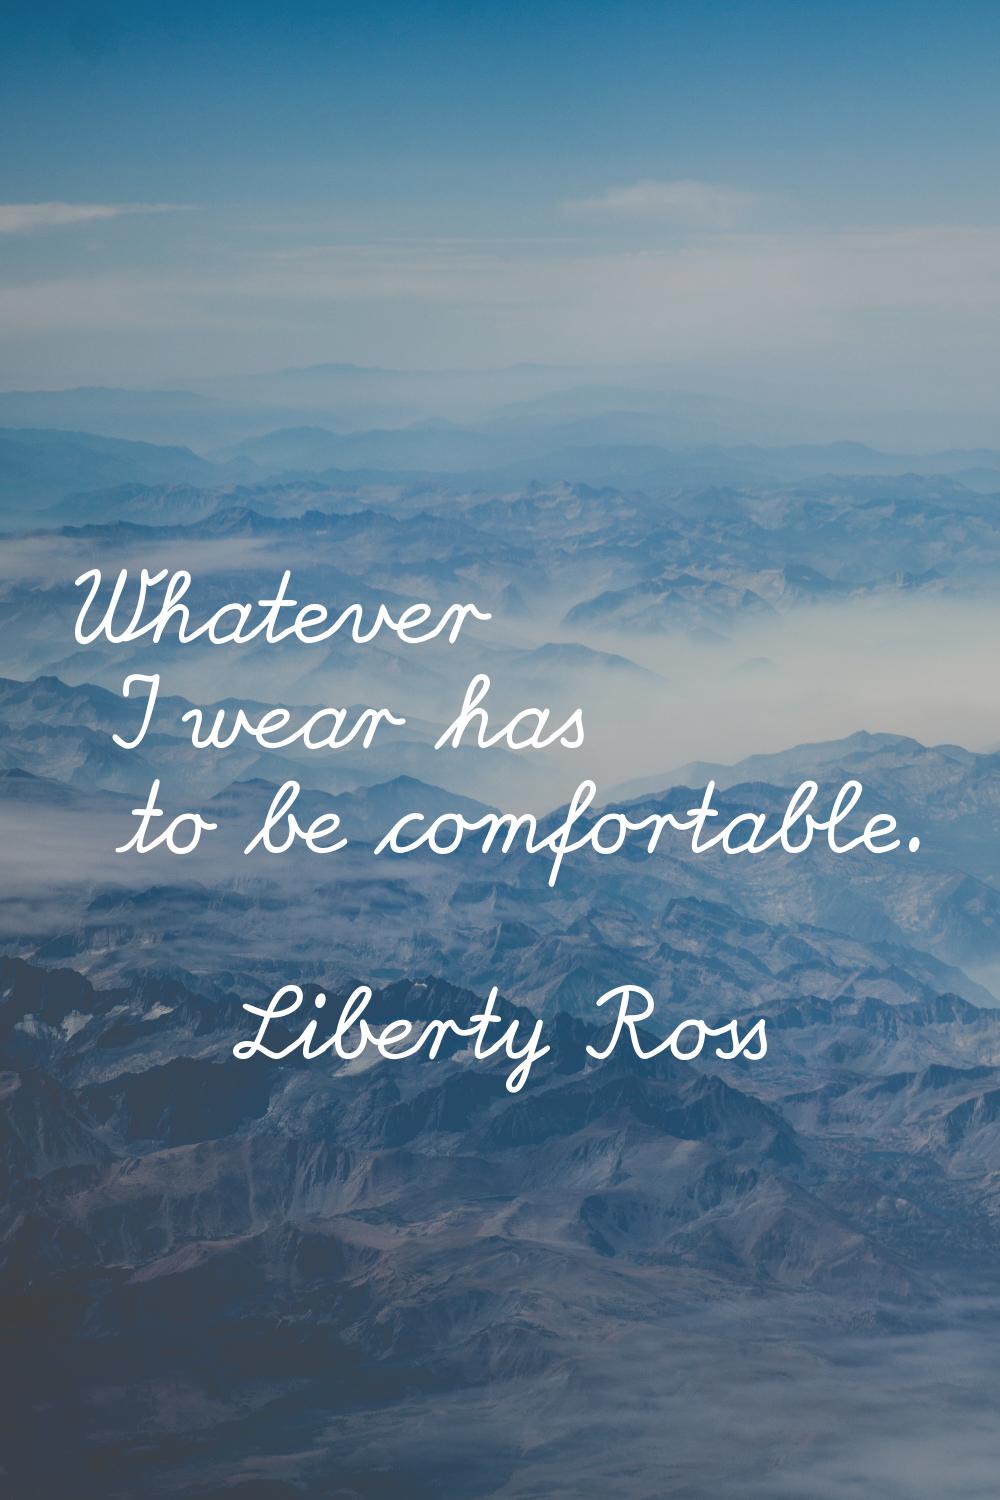 Whatever I wear has to be comfortable.